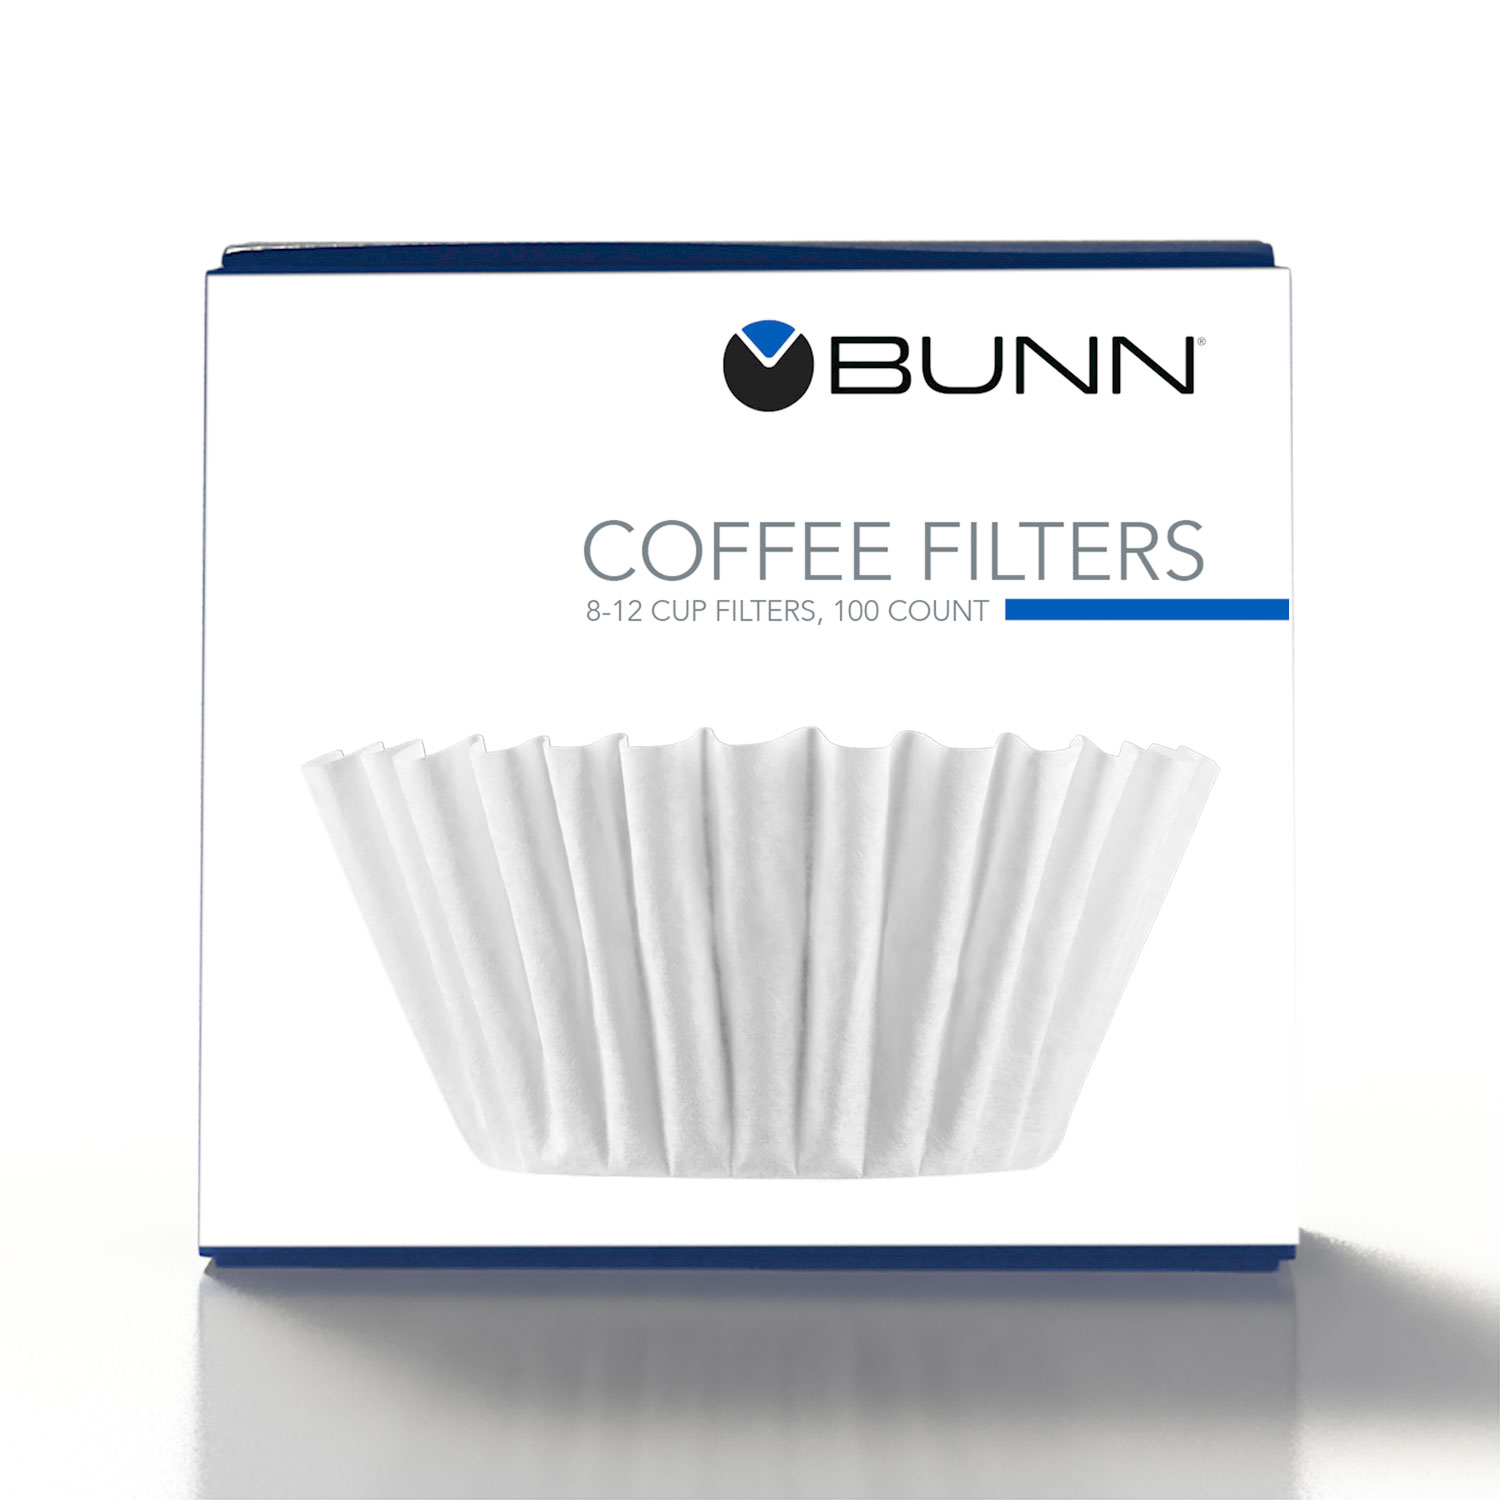 Bunn Coffee Filters Flat Bottom Paper Stay In Place 10-12 Cup 100 Count 